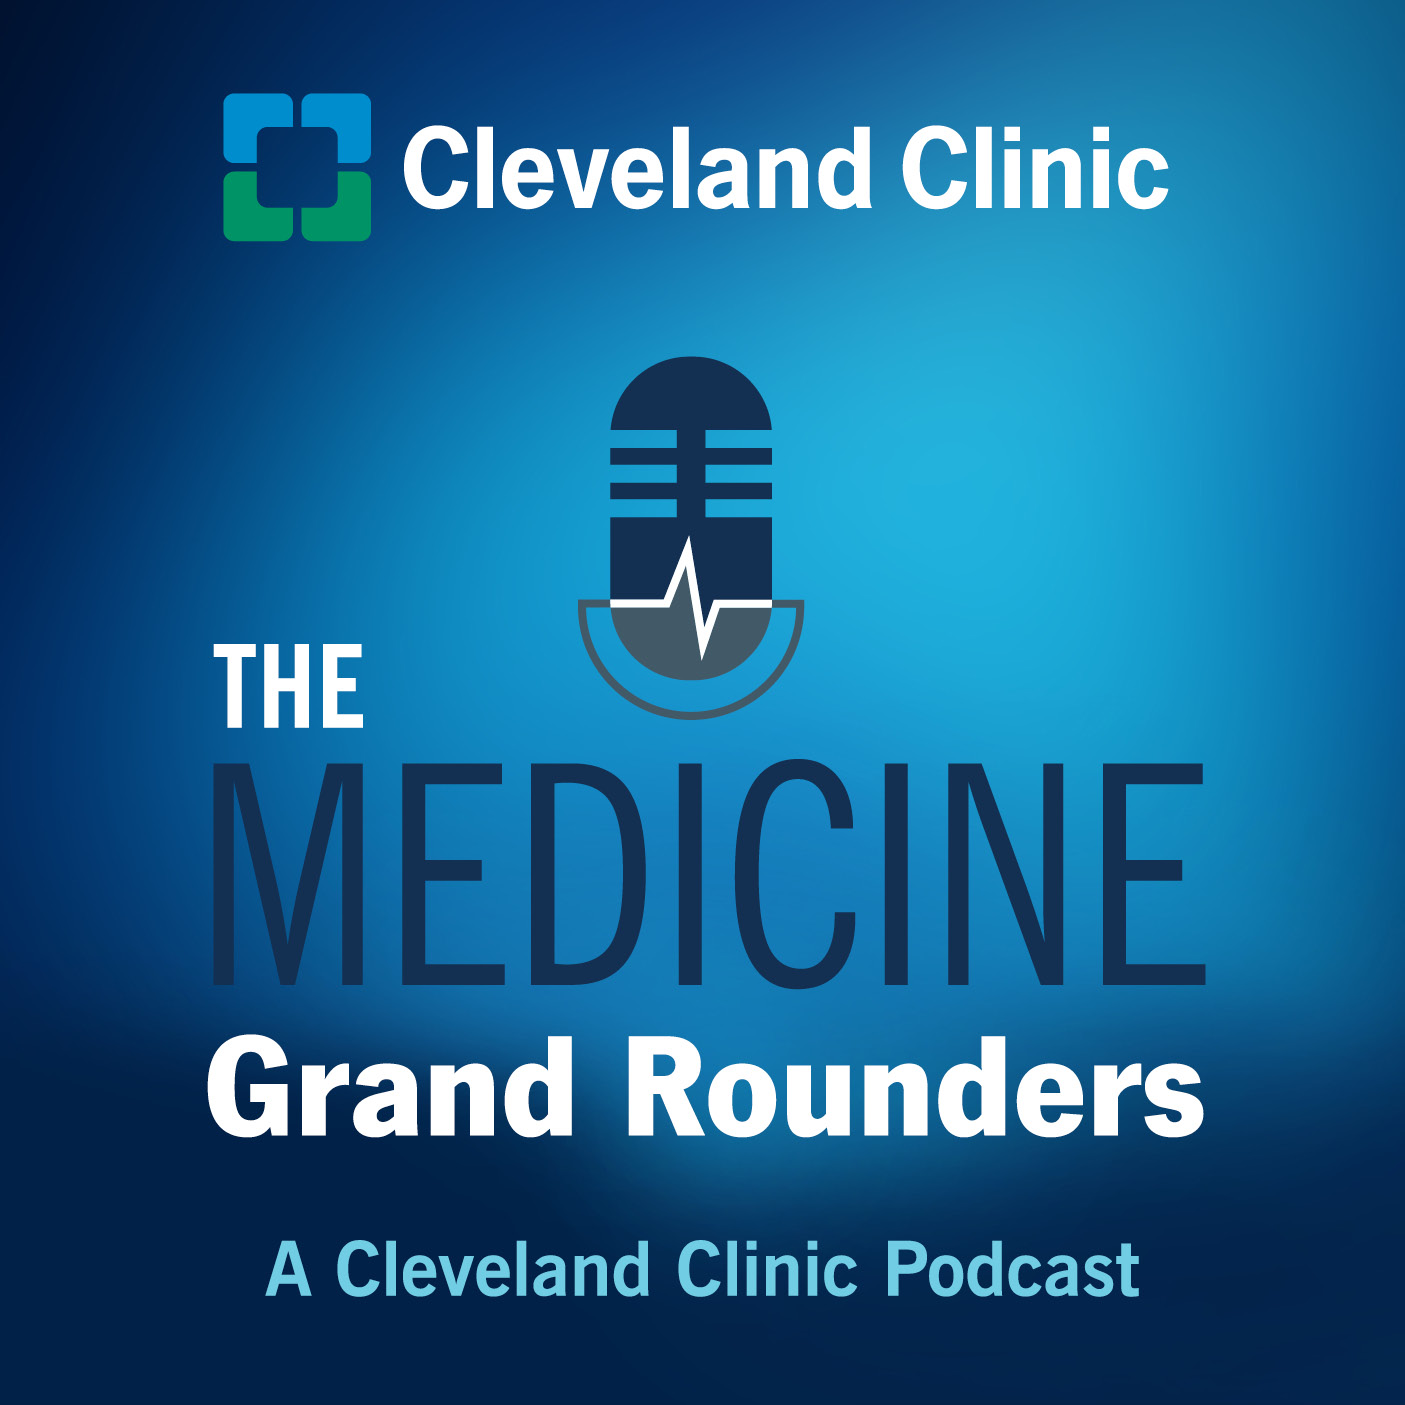 The Medicine Grand Rounders Image